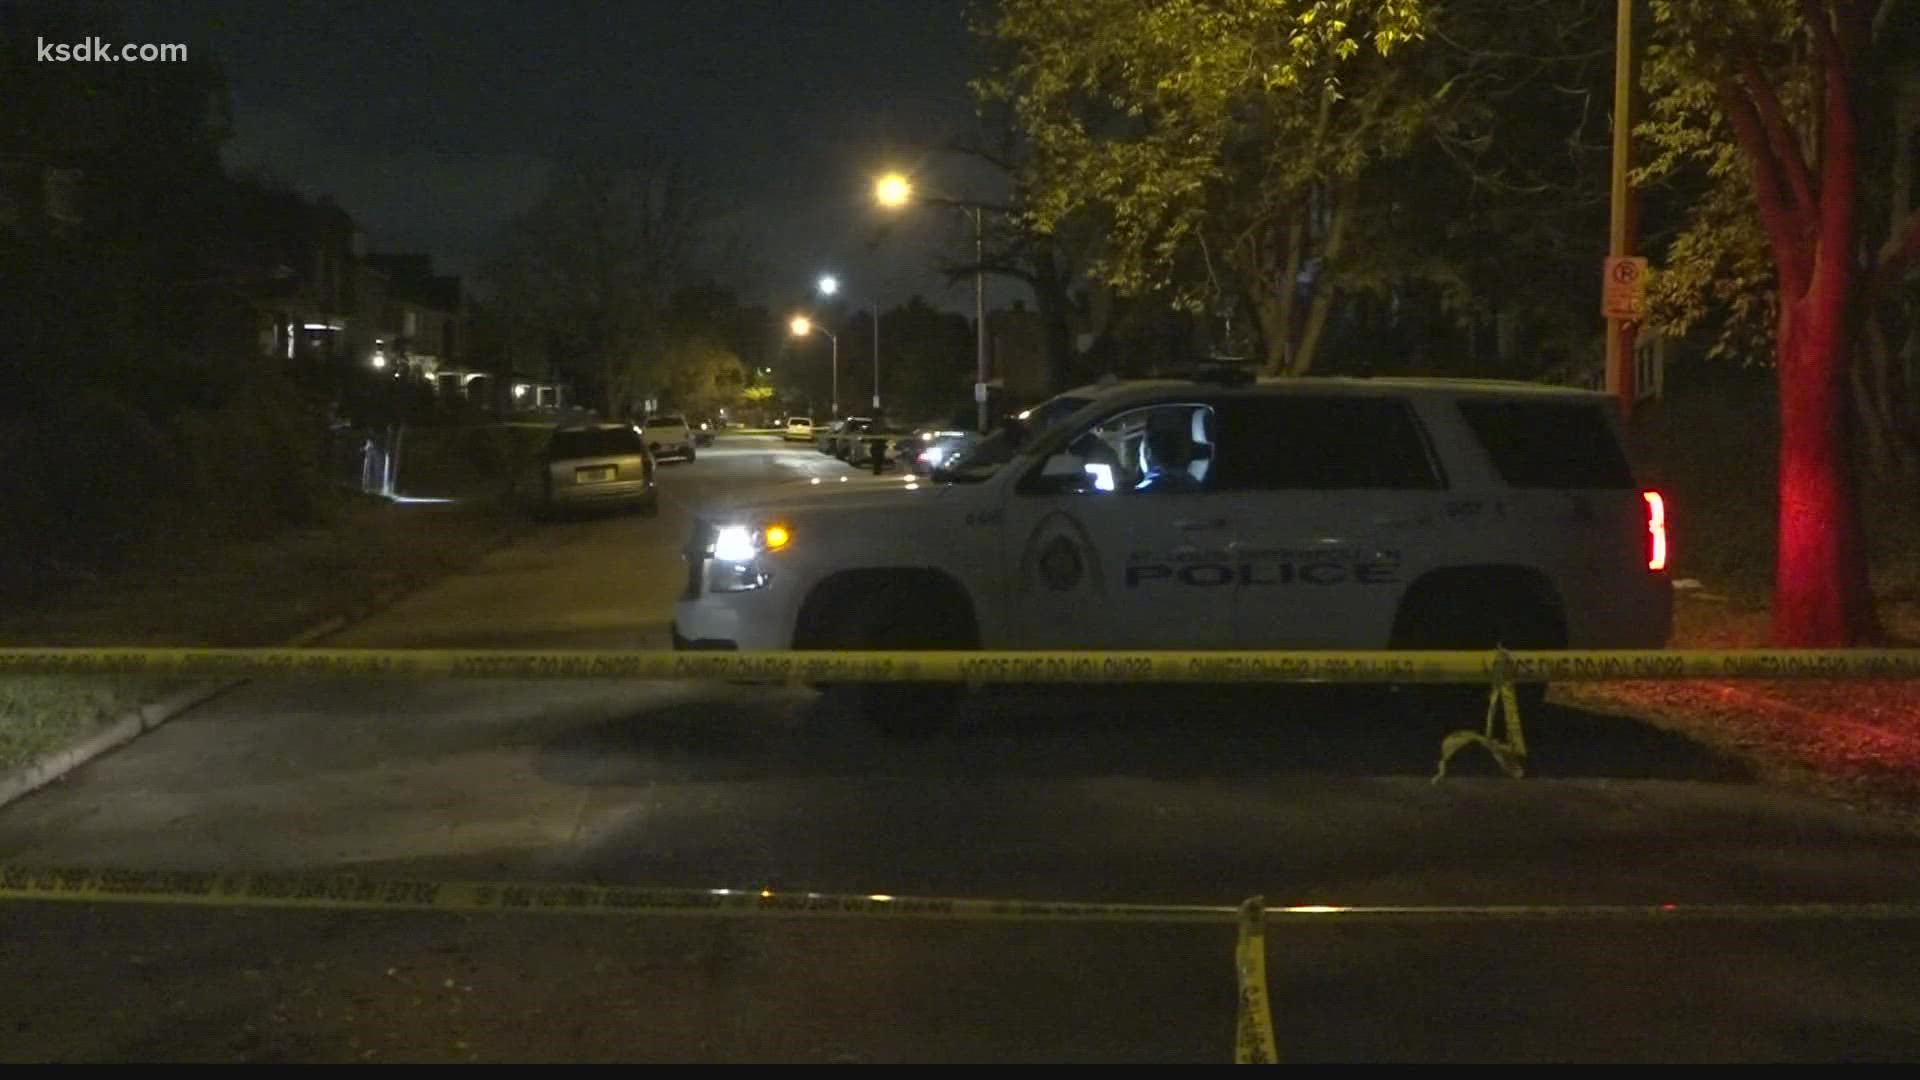 Police were investigating a shooting that left a man injured when more shots rang out. A woman was found dead.